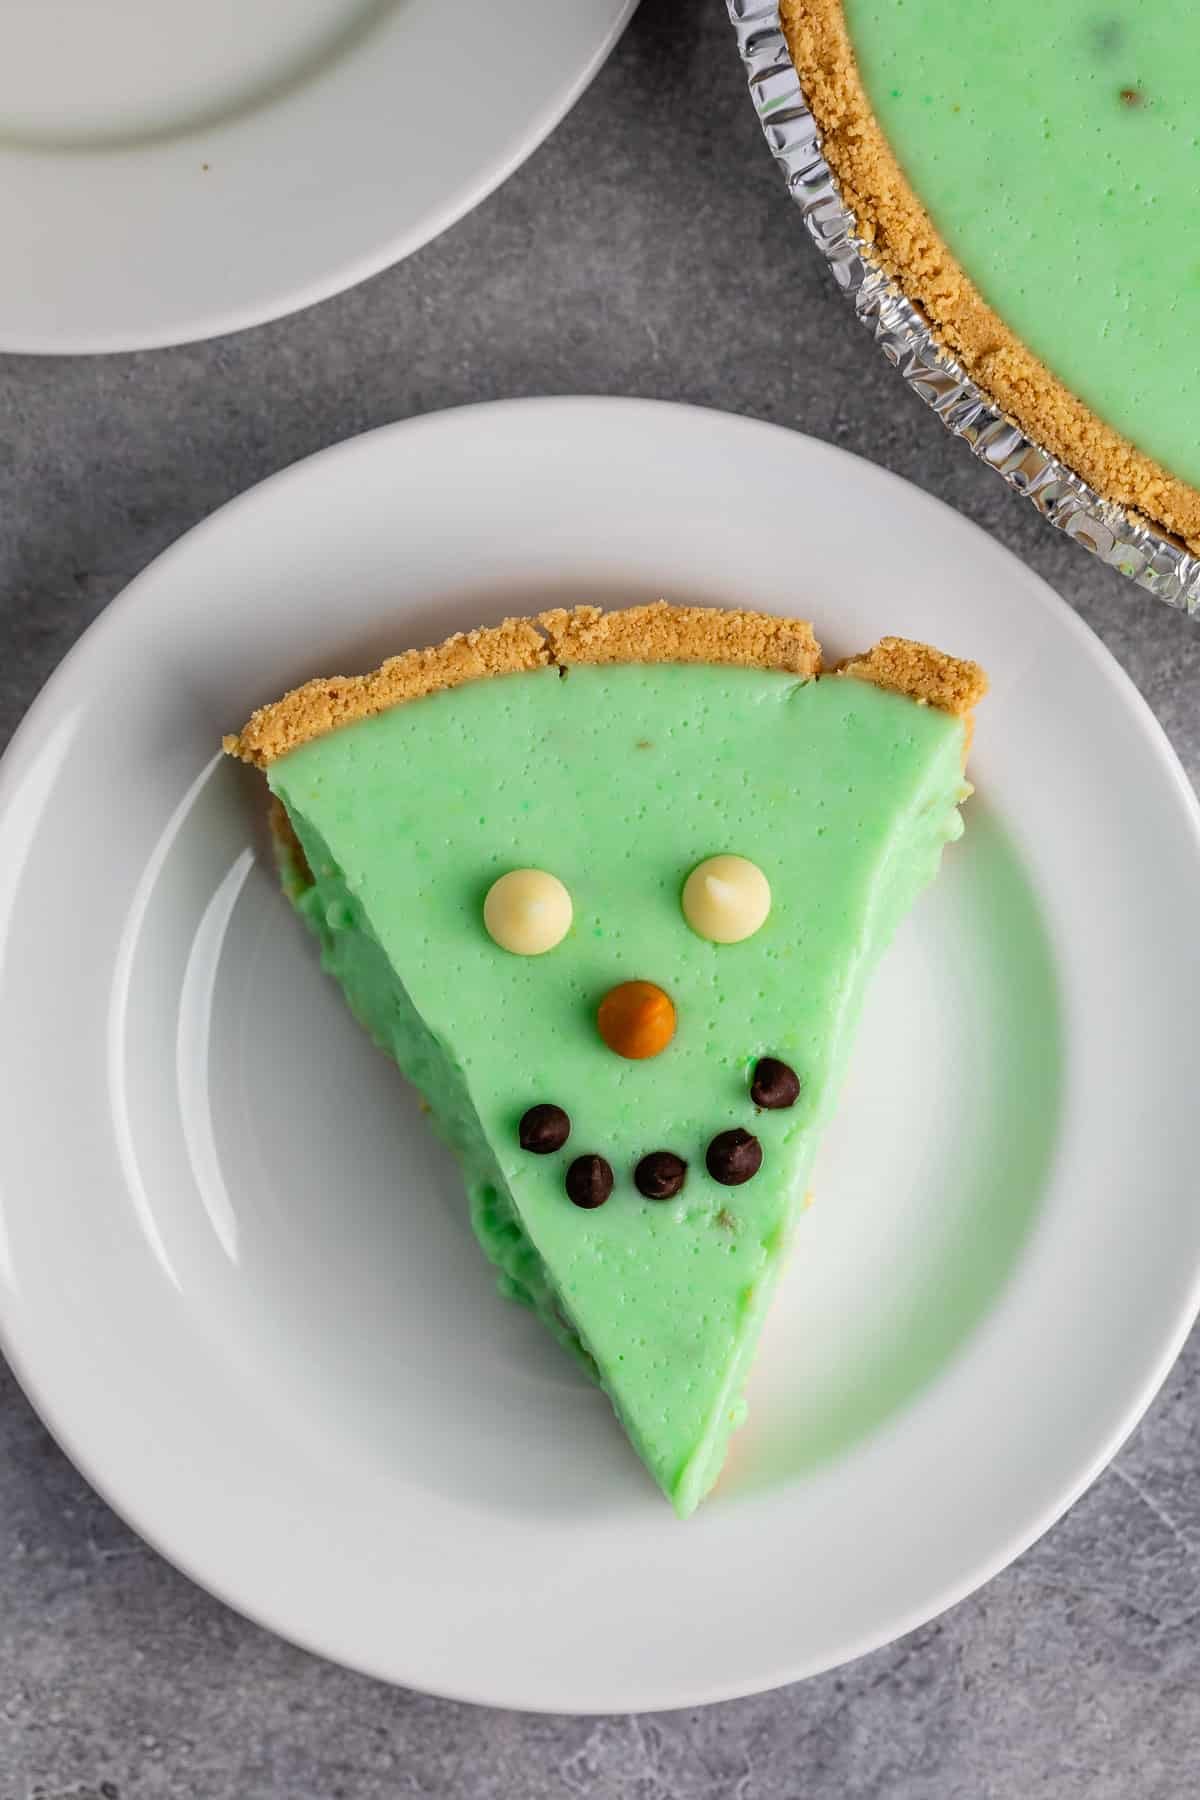 green alligator pie with chocolate chips on top making it a face on a white plate.